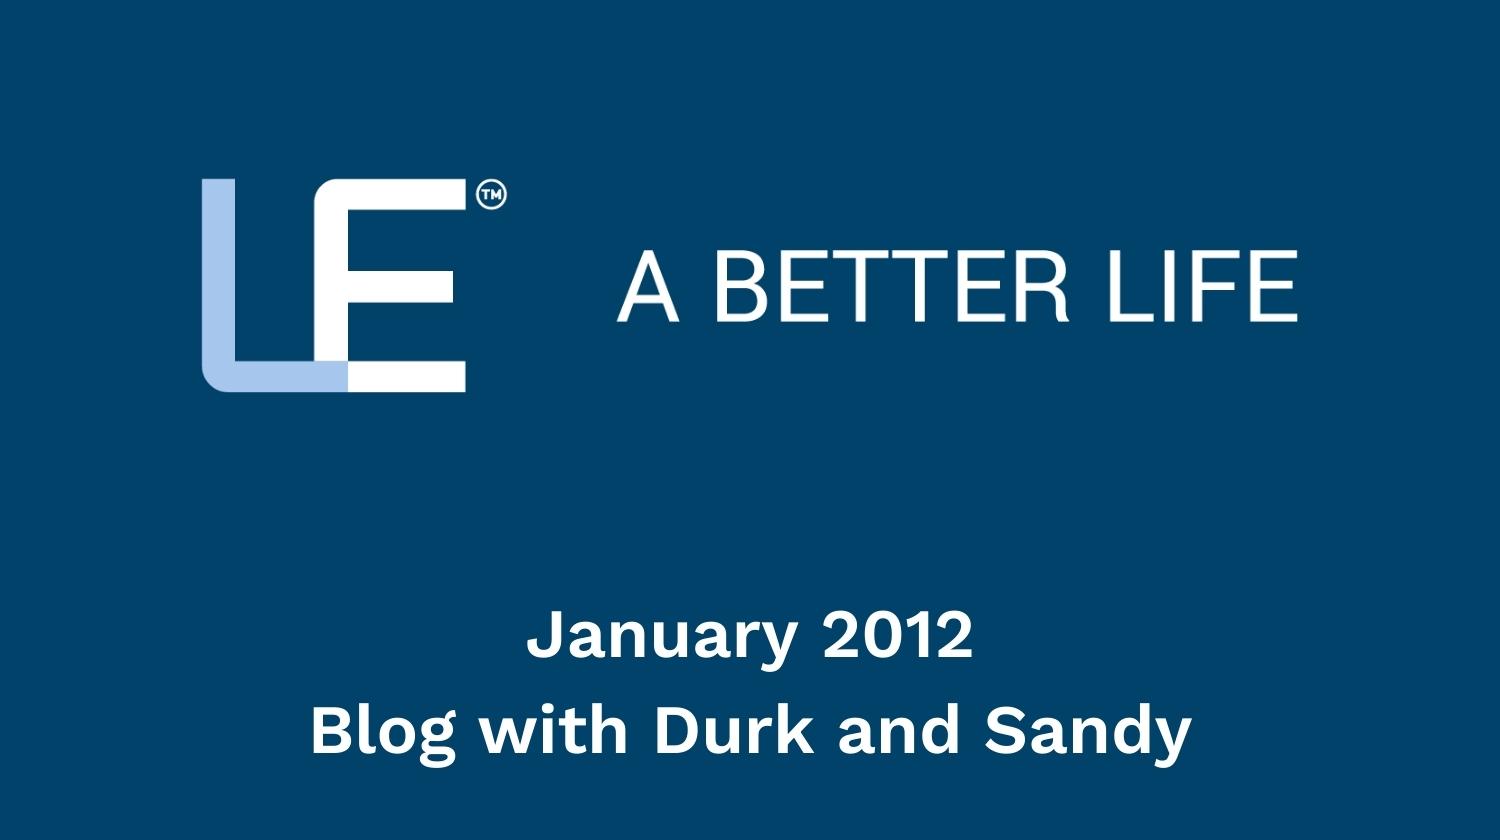 January 2012 Blog with Durk and Sandy